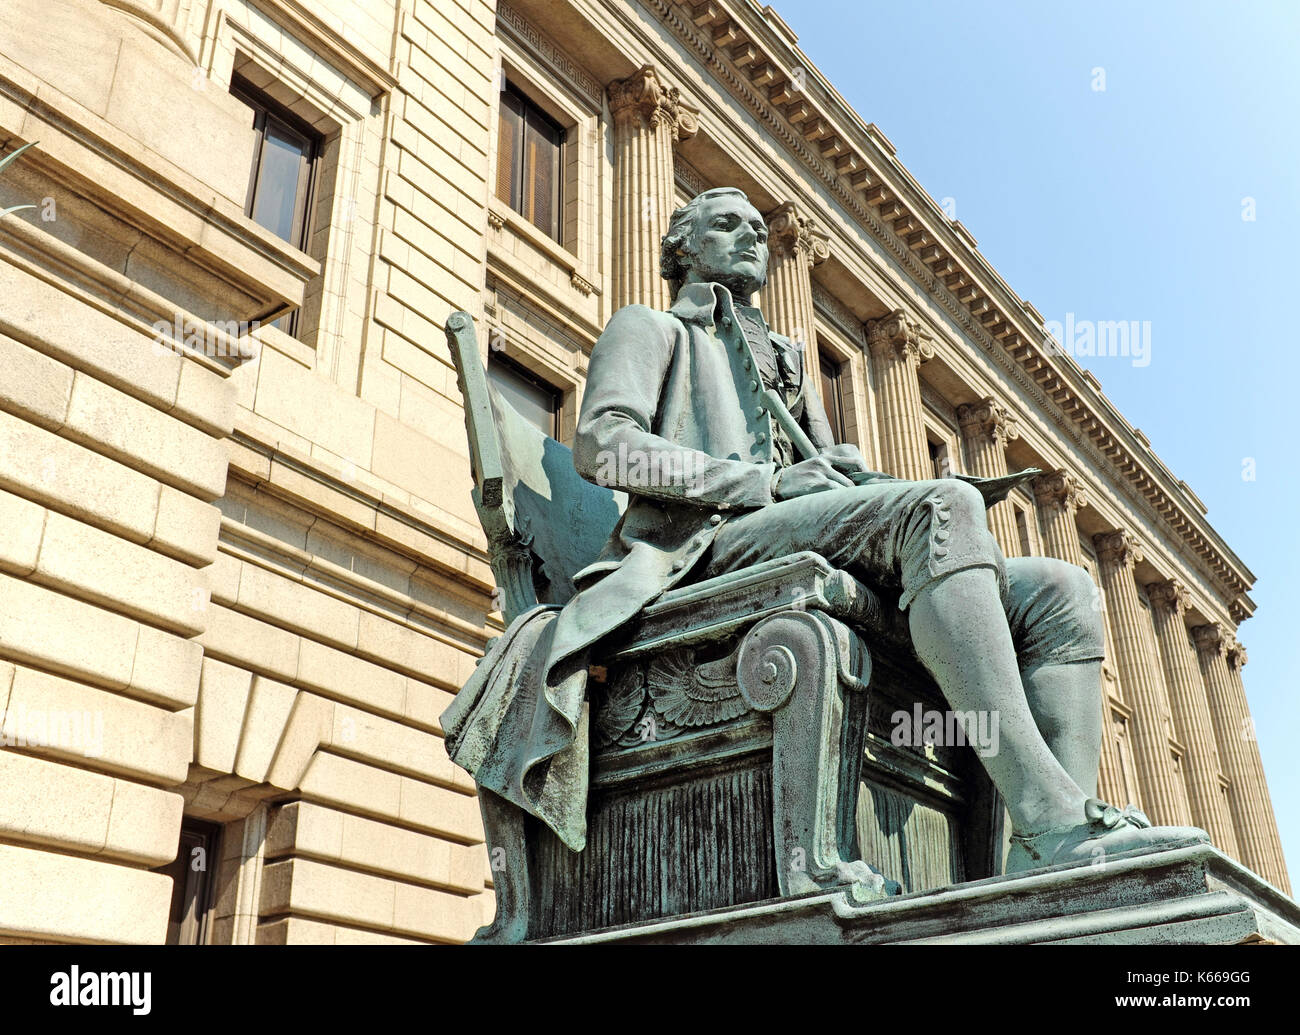 Statue of Alexander Hamilton outside the imposing Cuyahoga County Courthouse in downtown Cleveland, Ohio, USA. Stock Photo